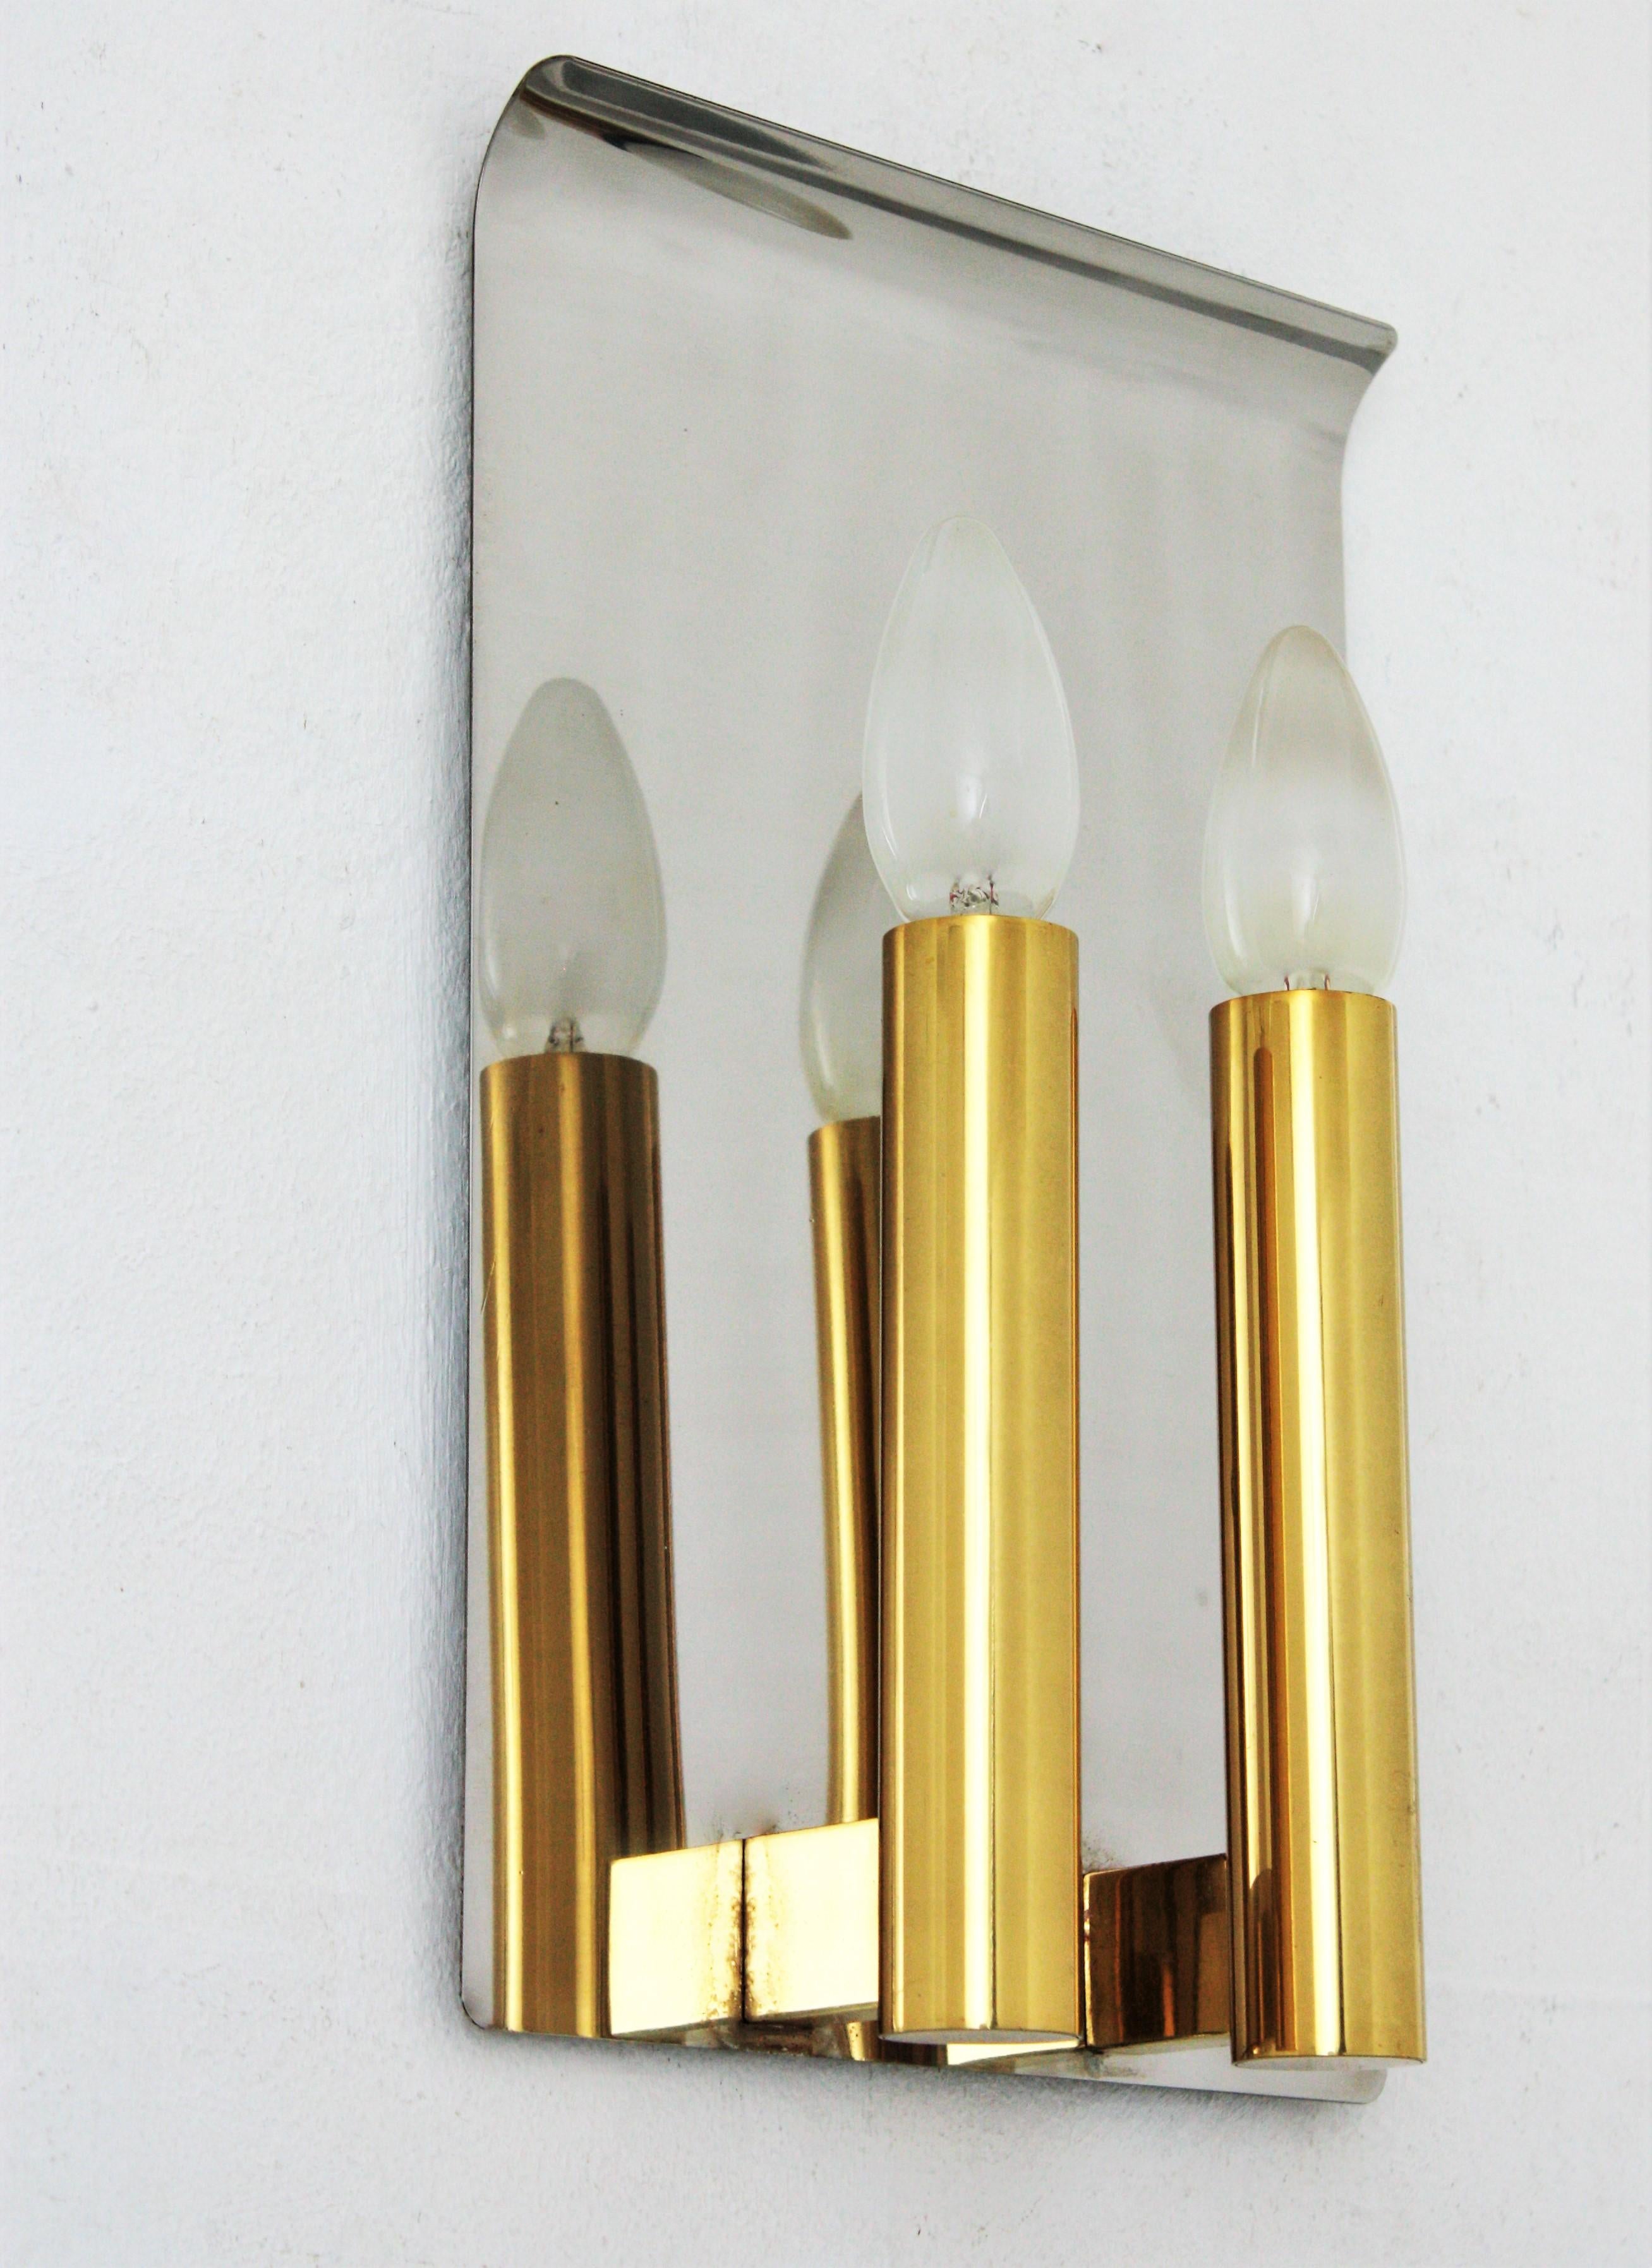 Sciolari Wall Sconce in Brass and Steel, Italy, 1960s For Sale 3